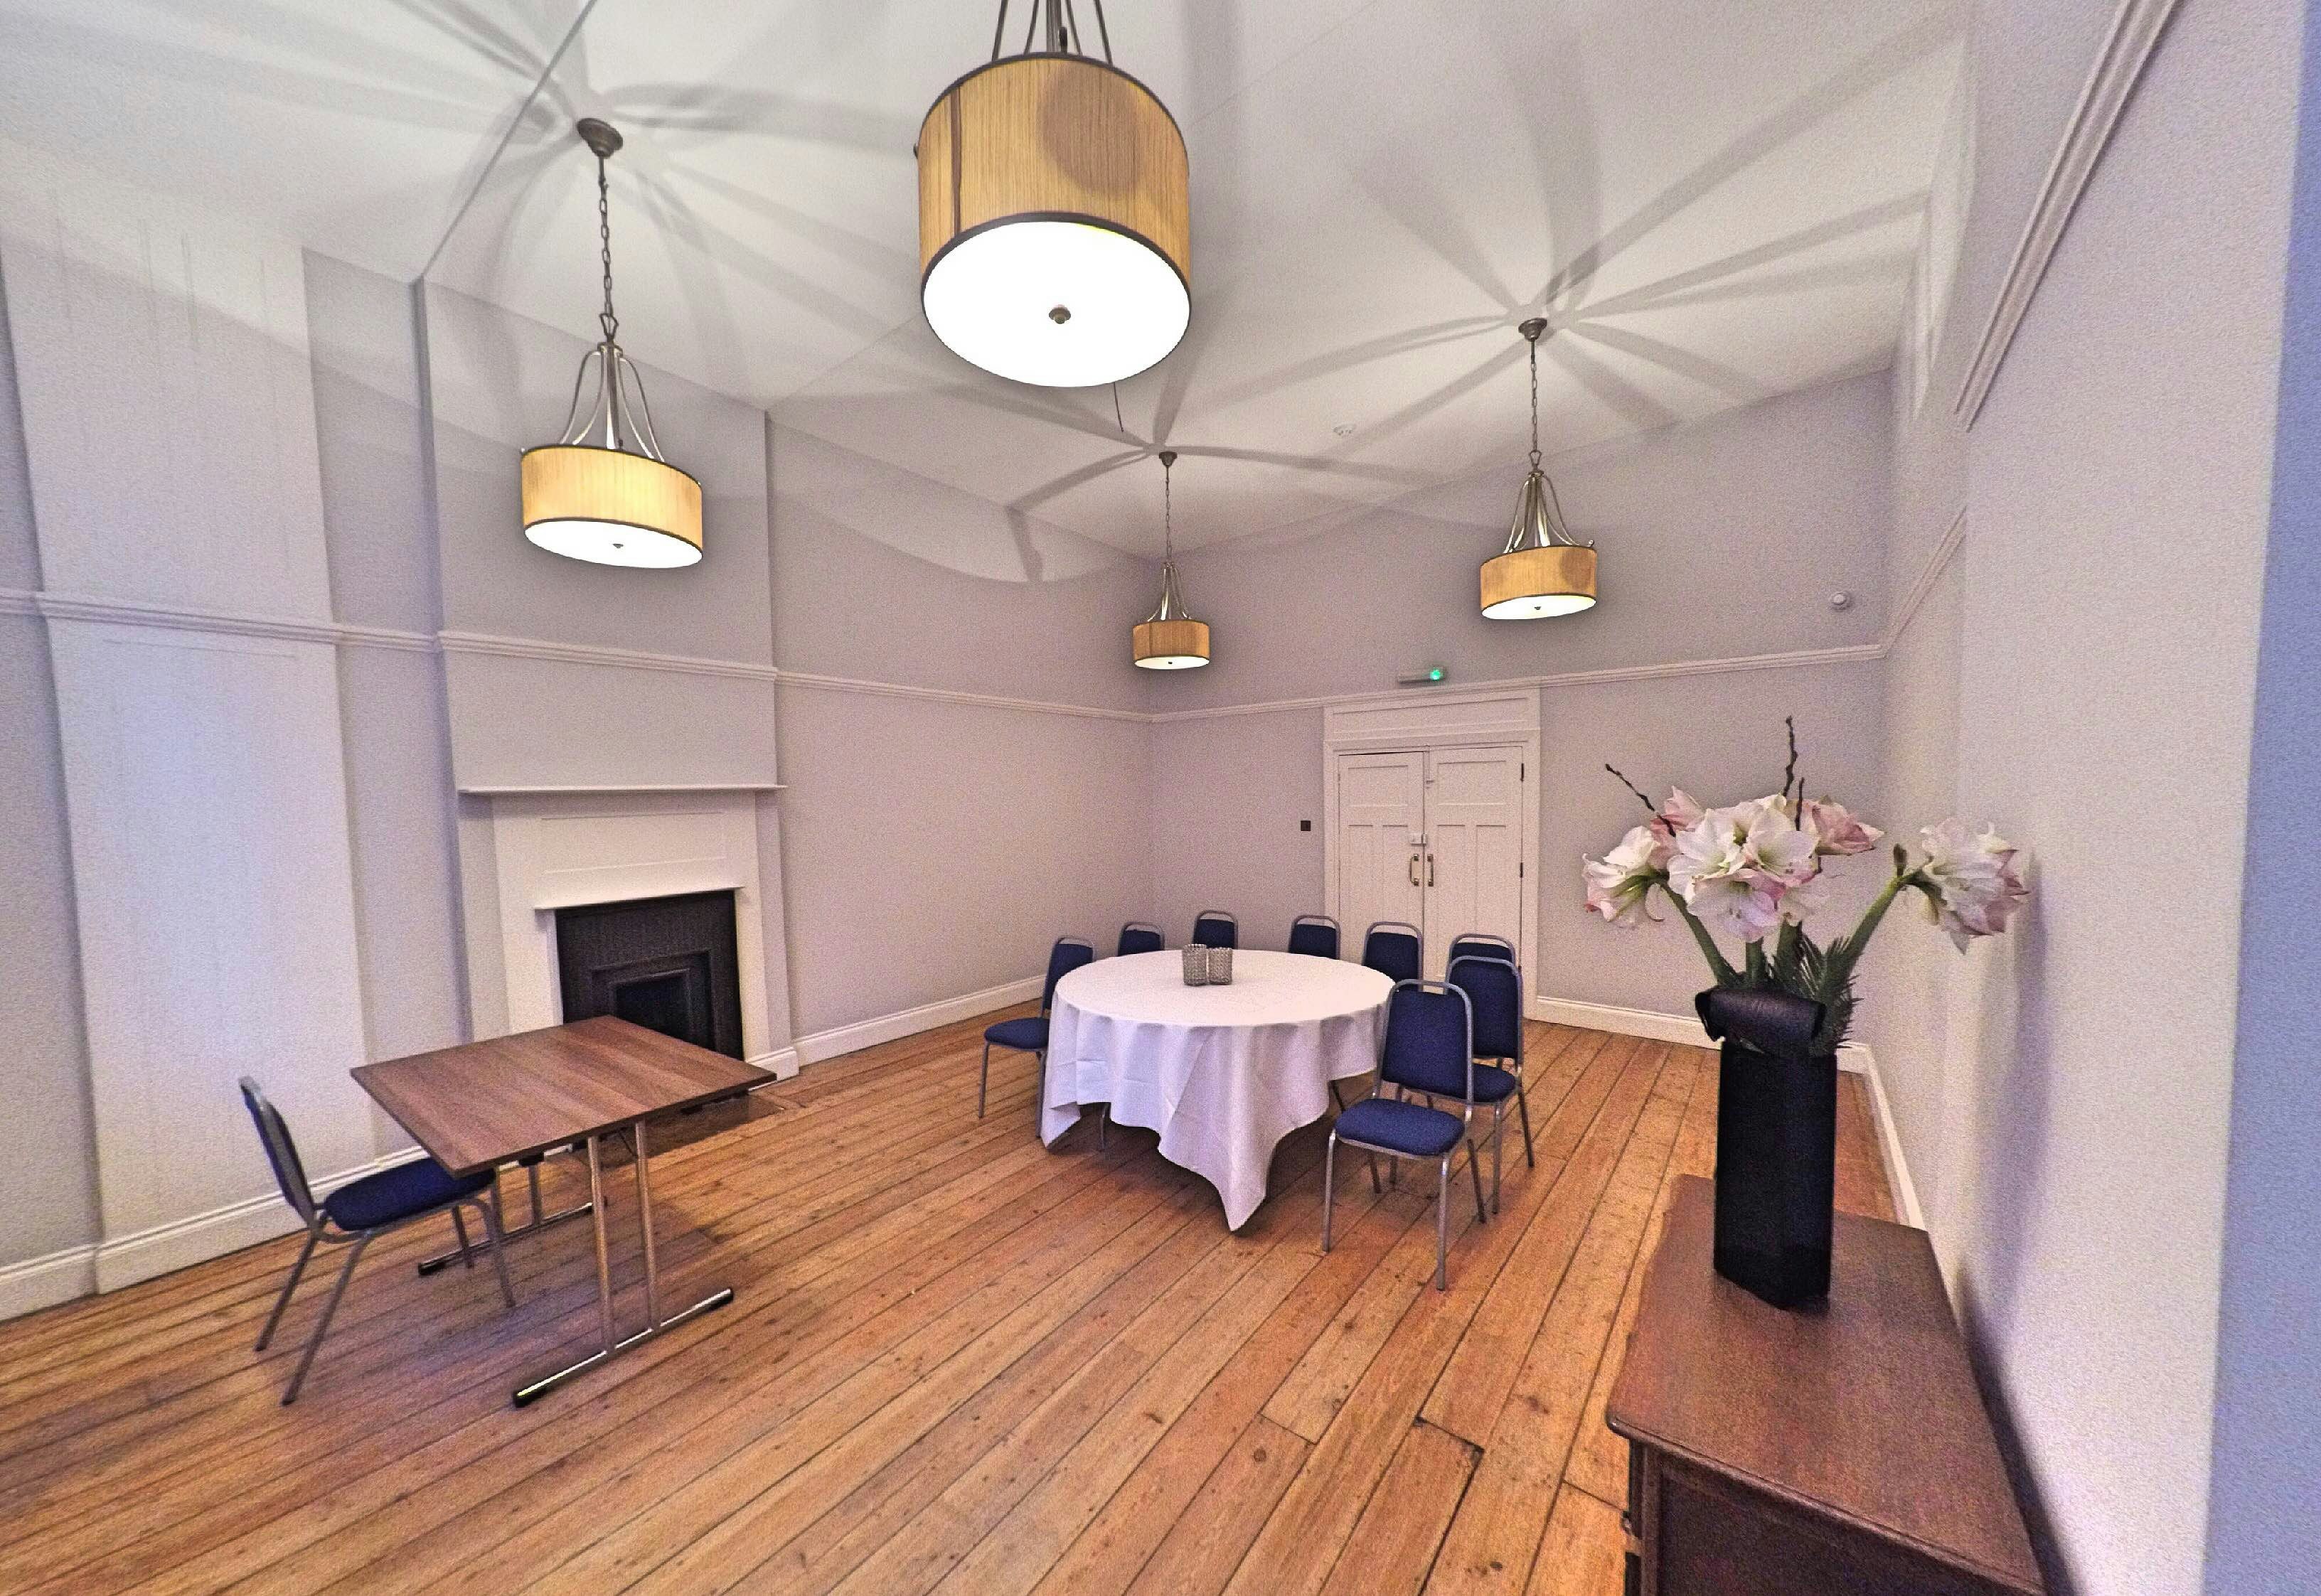 Unusual Team Building Activities Venues in London - Mary Ward House